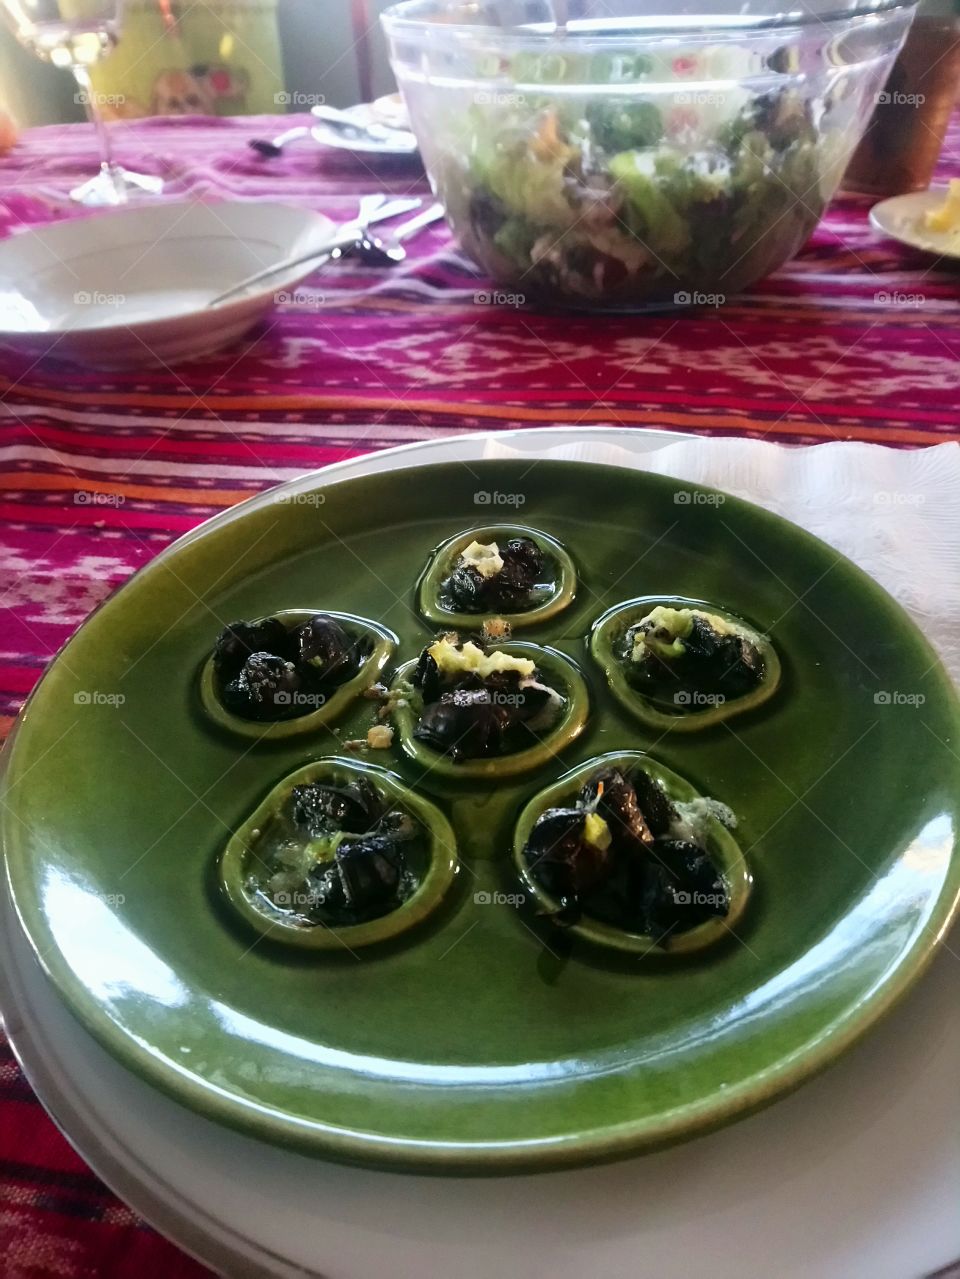 Garlic snails this is delicious